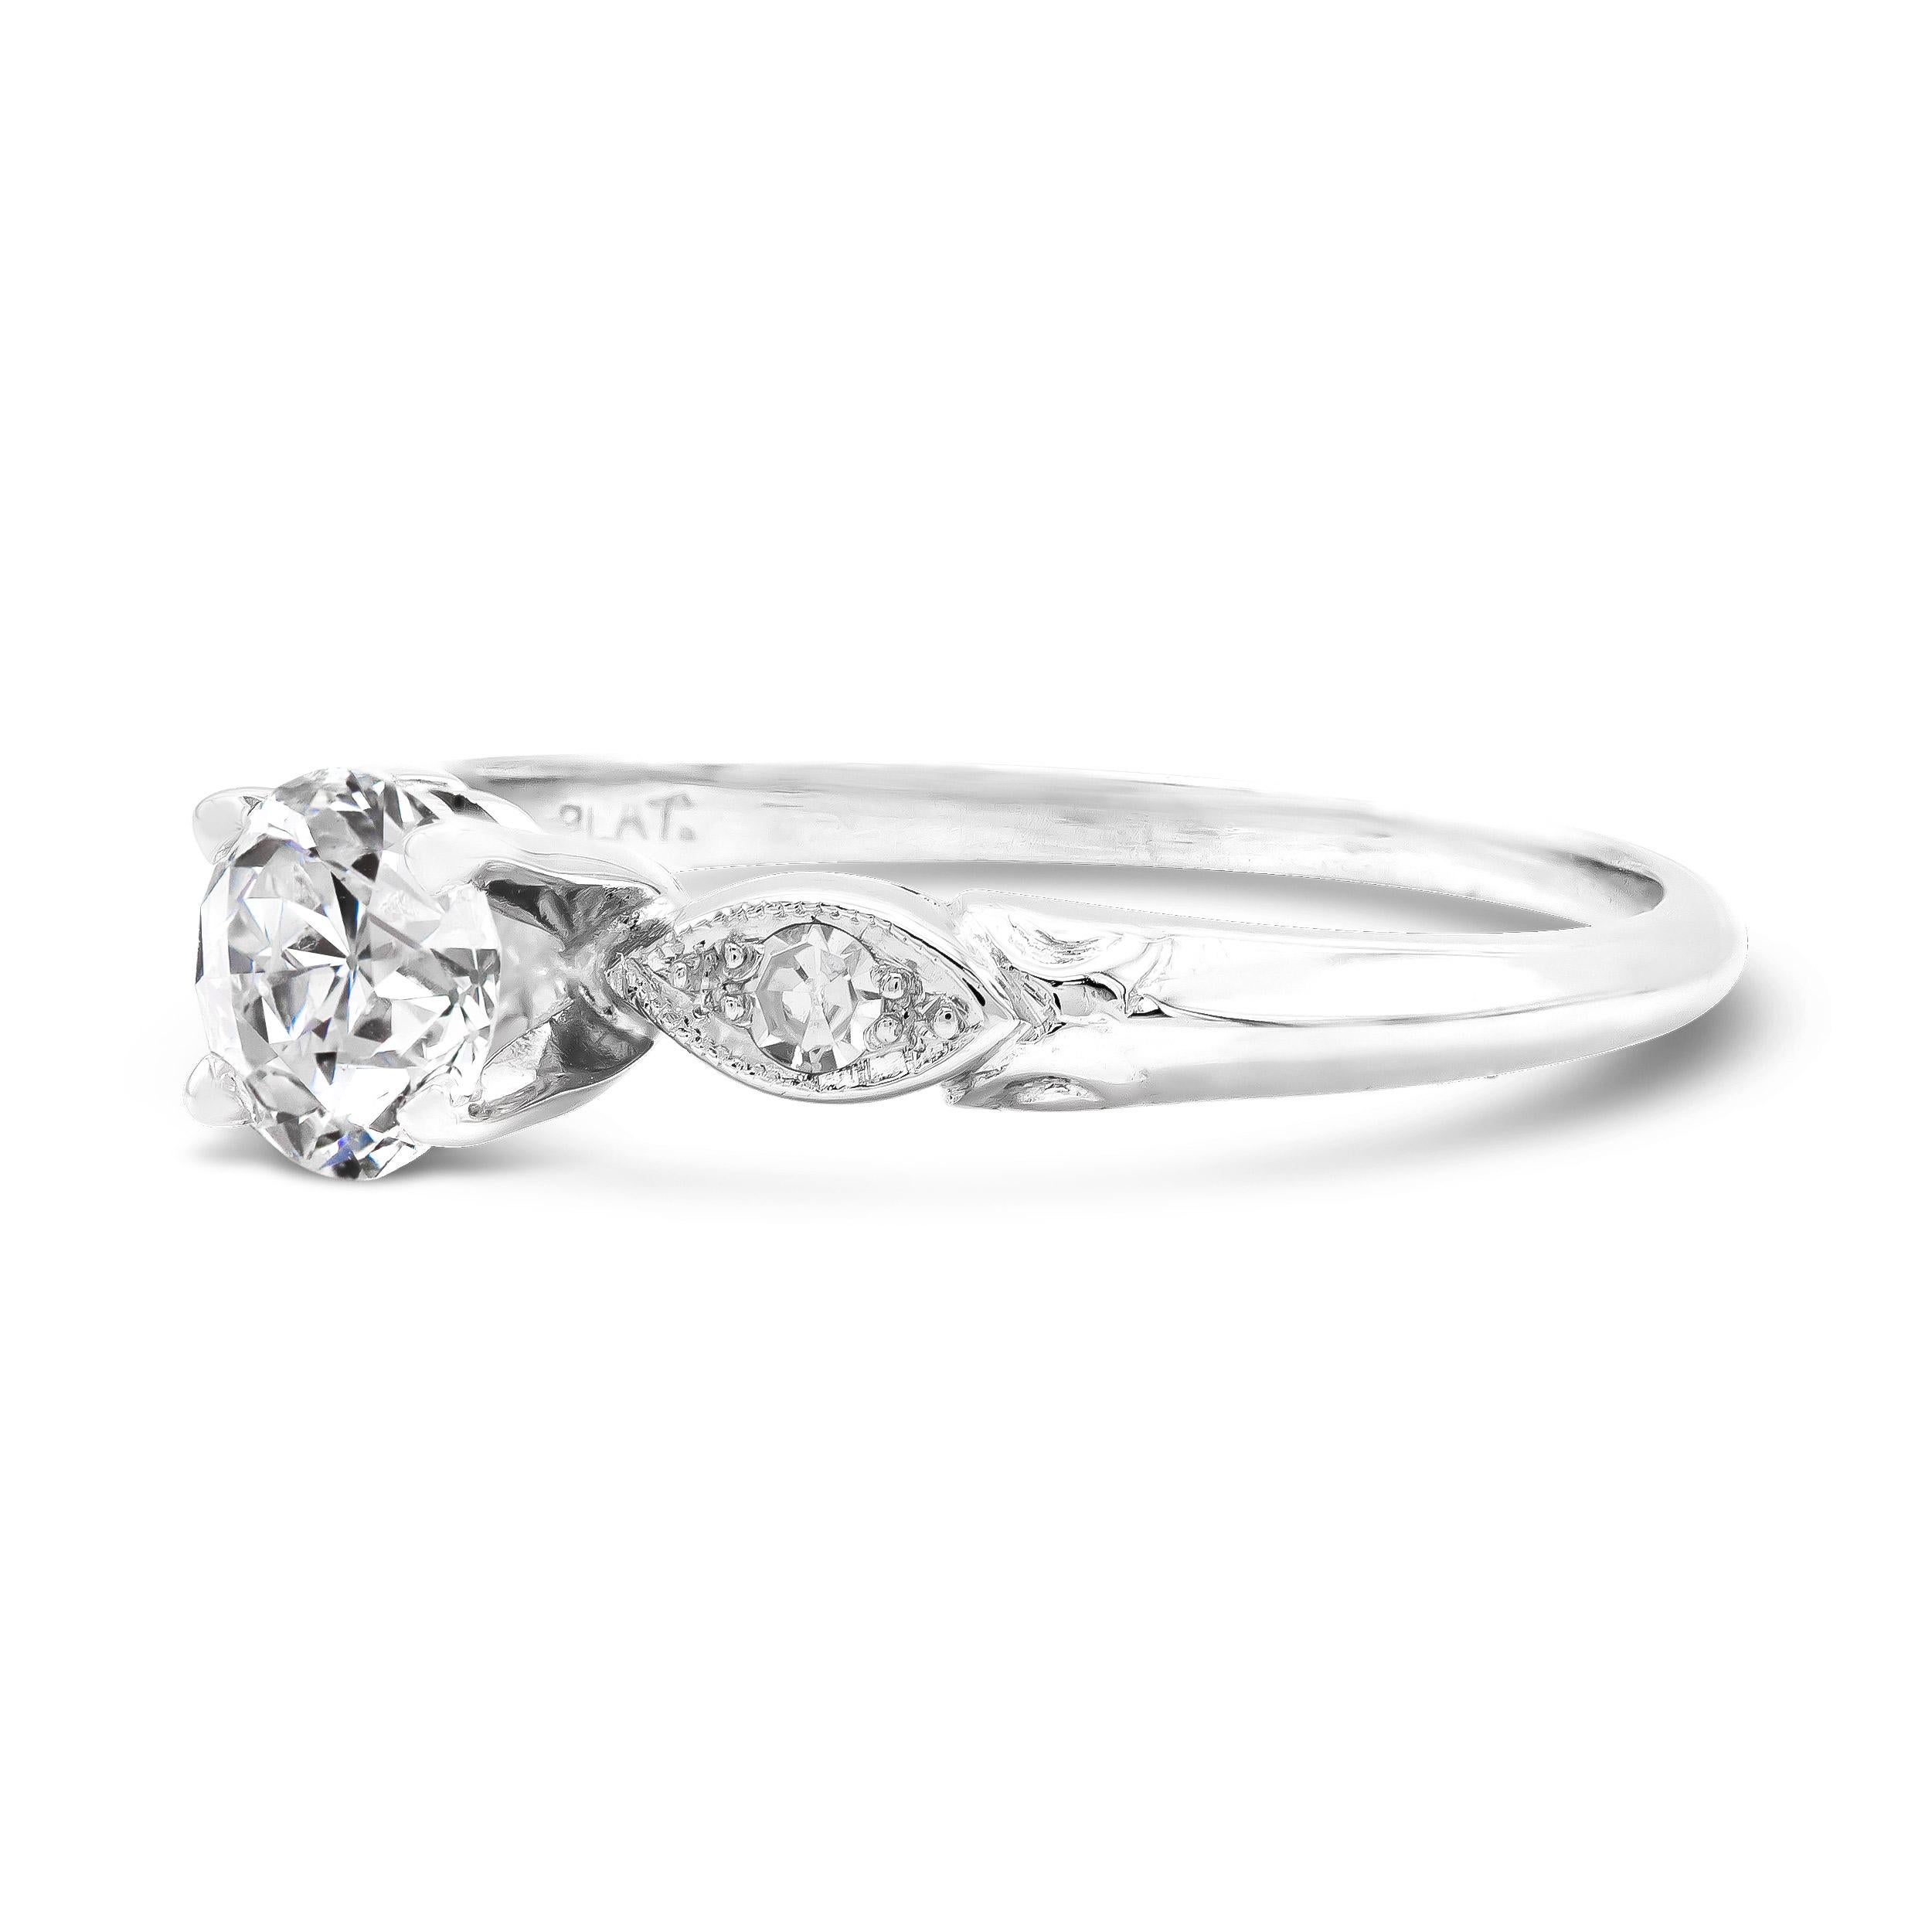 It doesn't sweeter than this. A very charming, very white, old Euro centers this vintage engagement ring. The diamond, graded F SI2 by GIA, illuminates the hand. We love the classic four prong basket and sleek marquise-shaped shoulders.

Diamond